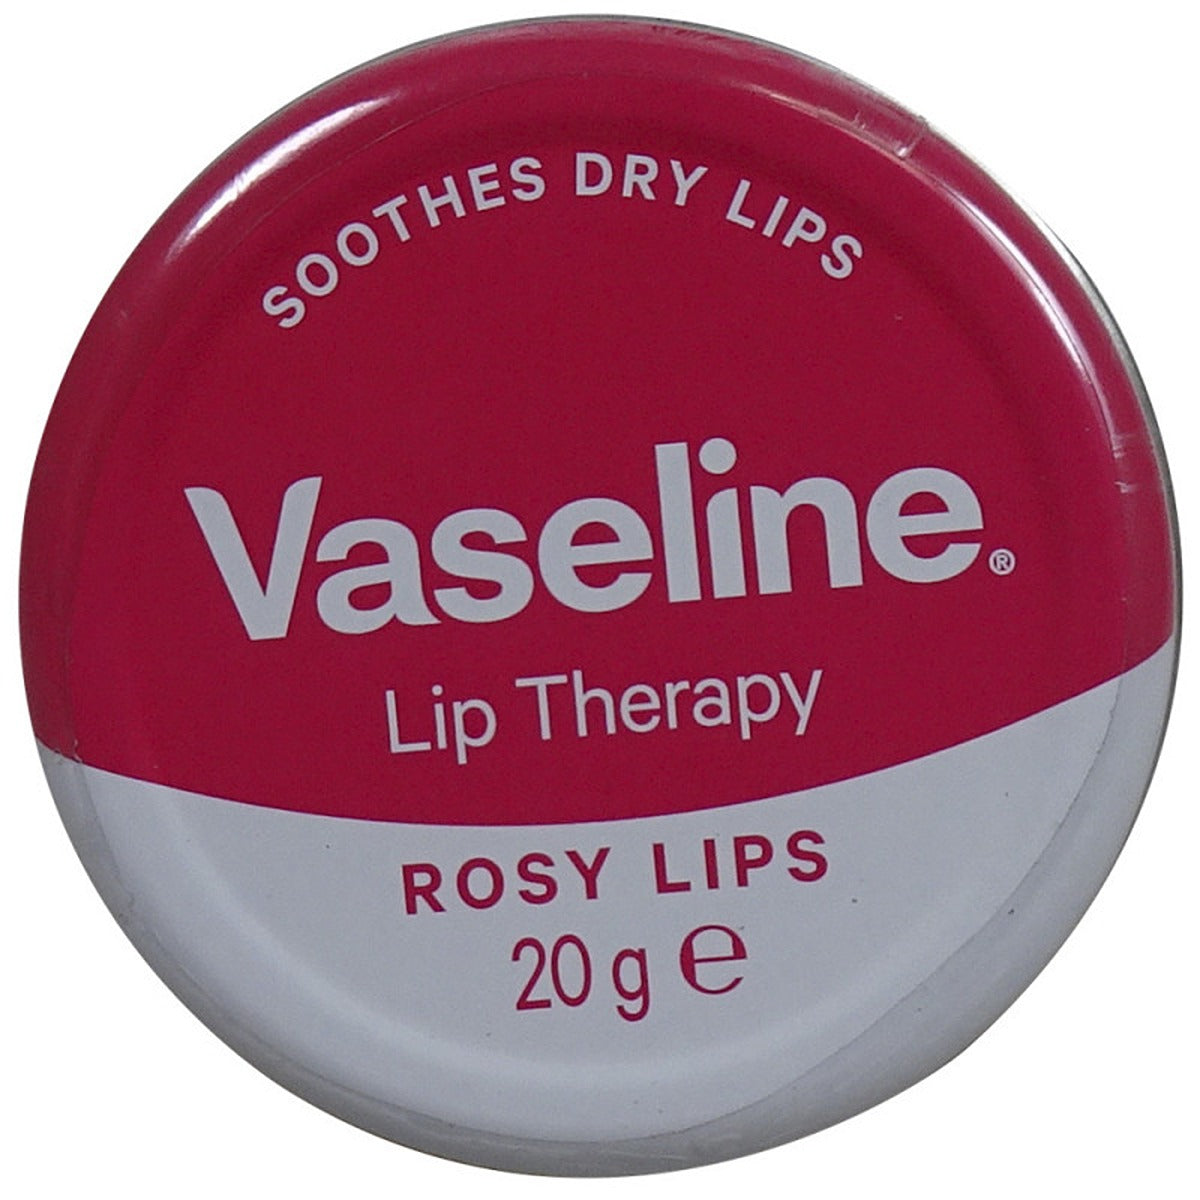 Vaseline - Lip Therapy Rosy Lips - 20g - Continental Food Store